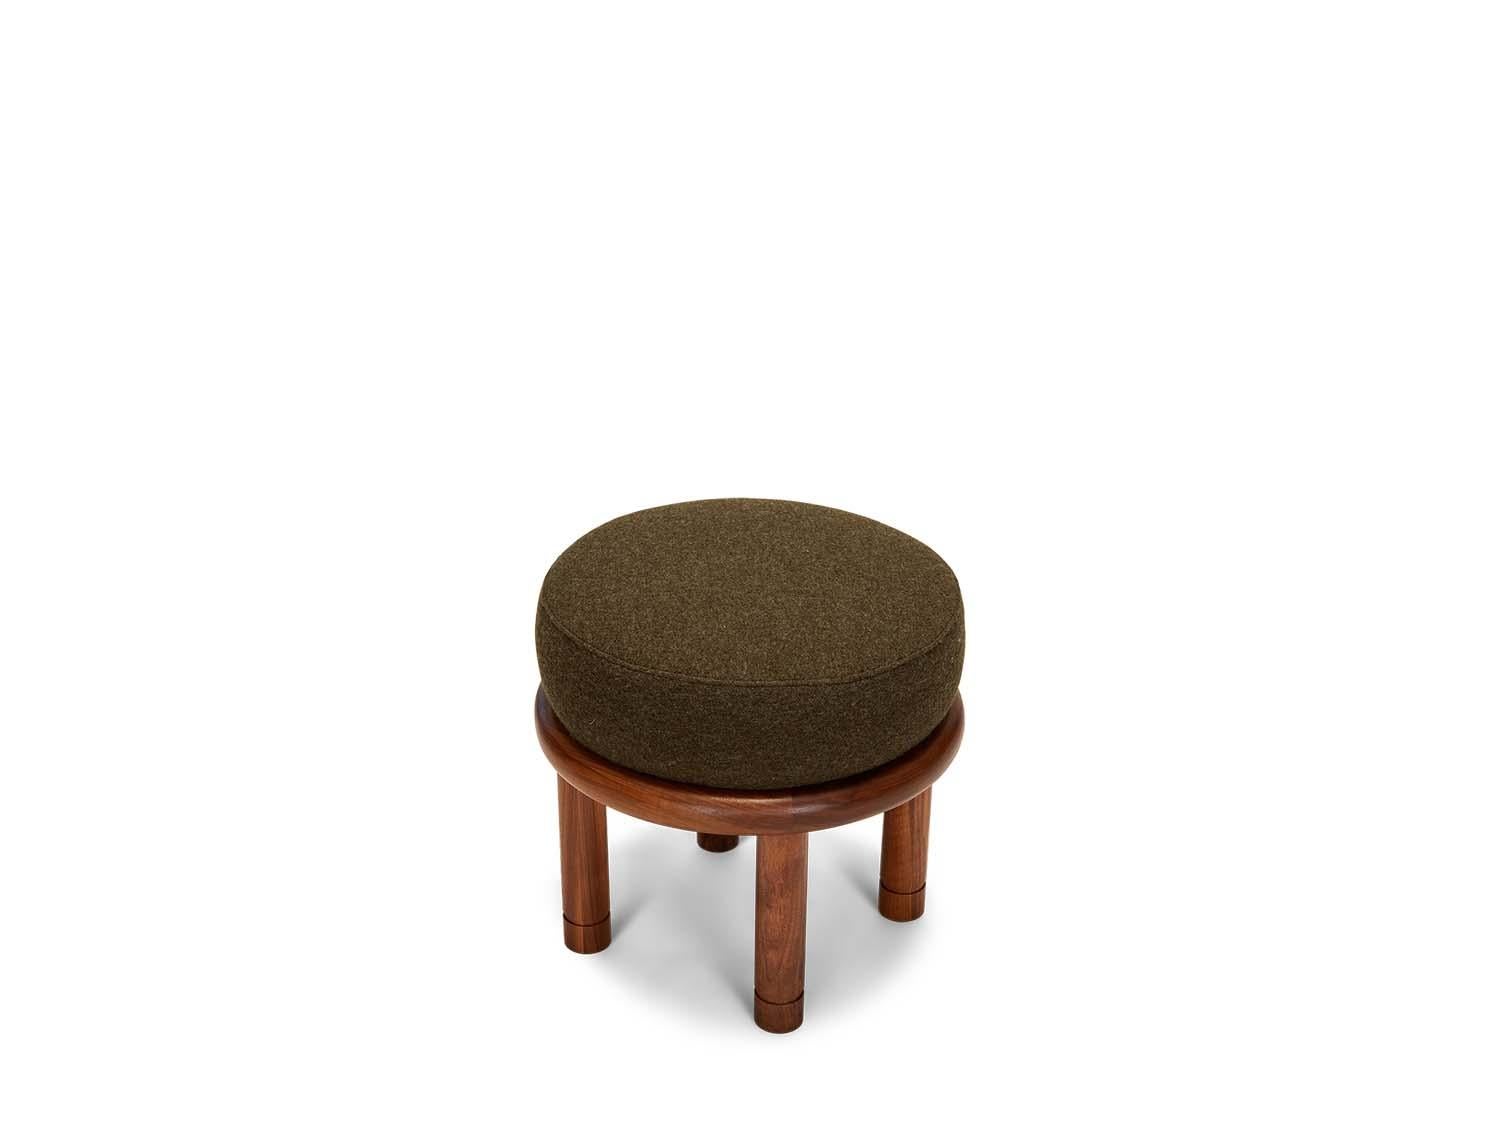 The Petite Moreno ottoman features a round solid wood base with four cylindrical legs and an upholstered top. Available in American walnut or white oak. 

 
 